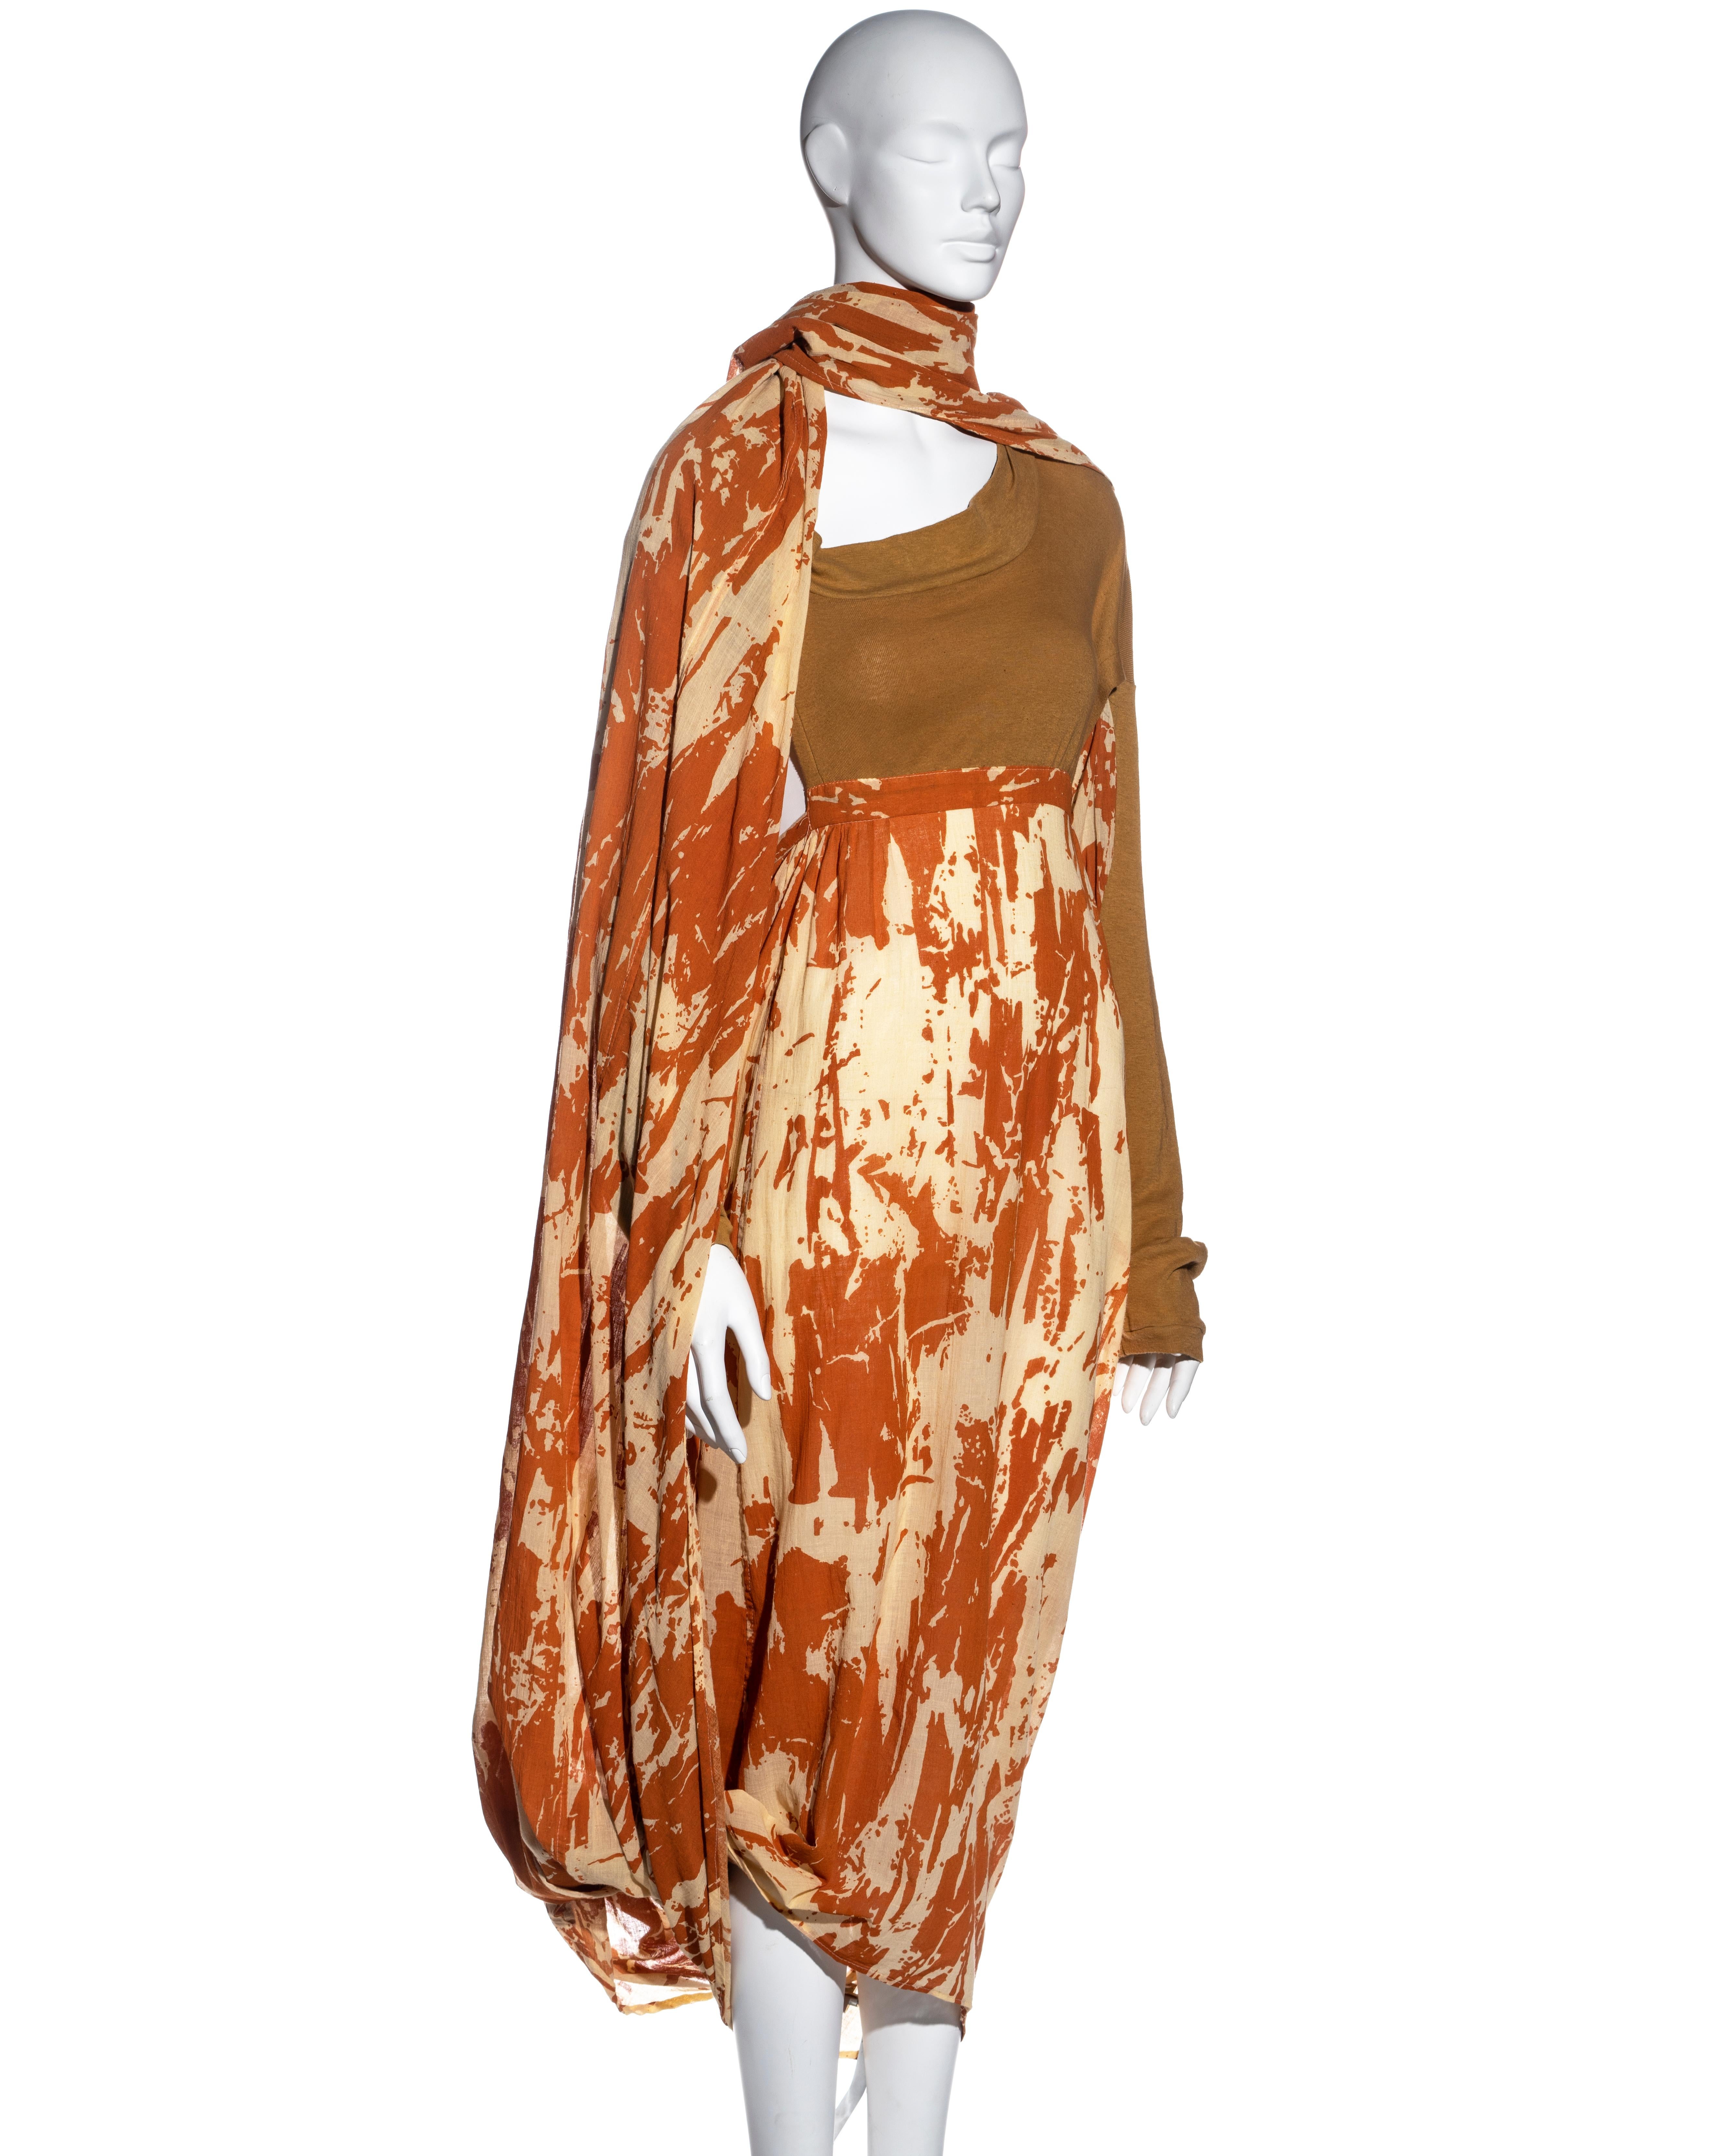 Women's Worlds End by Vivienne Westwood and Malcolm McLaren toga dress, ss 1982